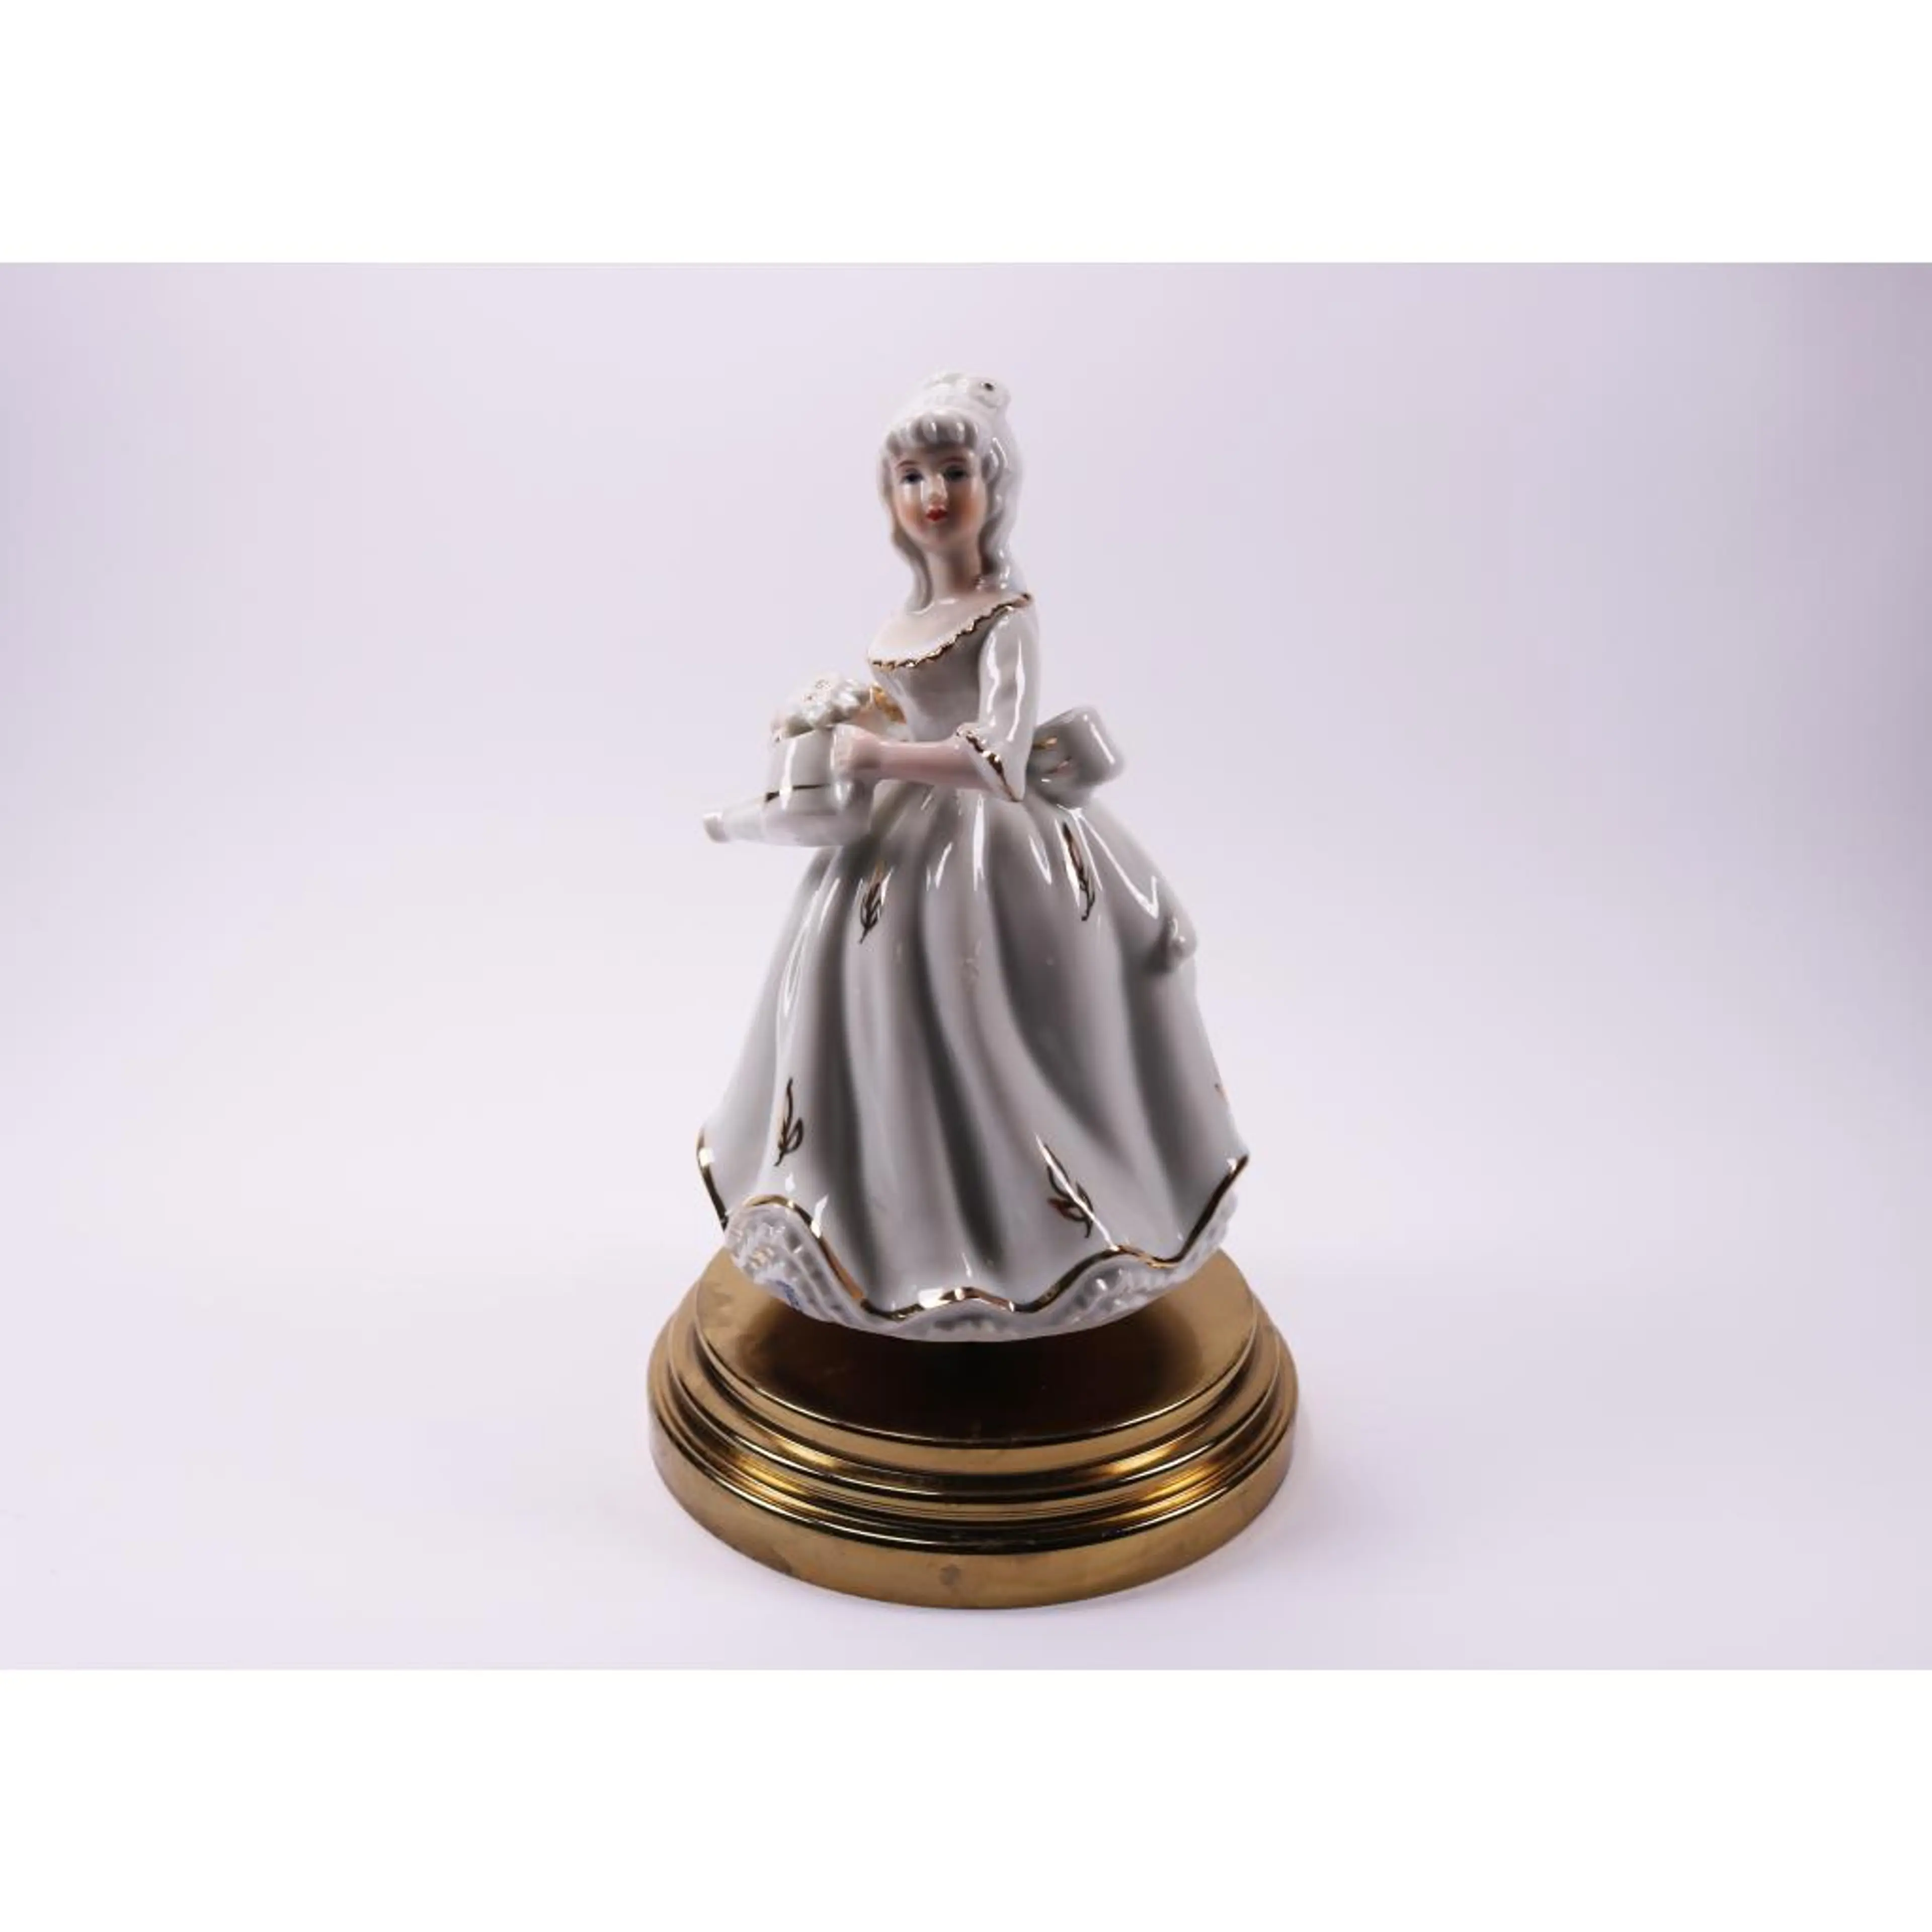 Vintage Porcelain Music Box Victorian Lady With Water Jug Planter